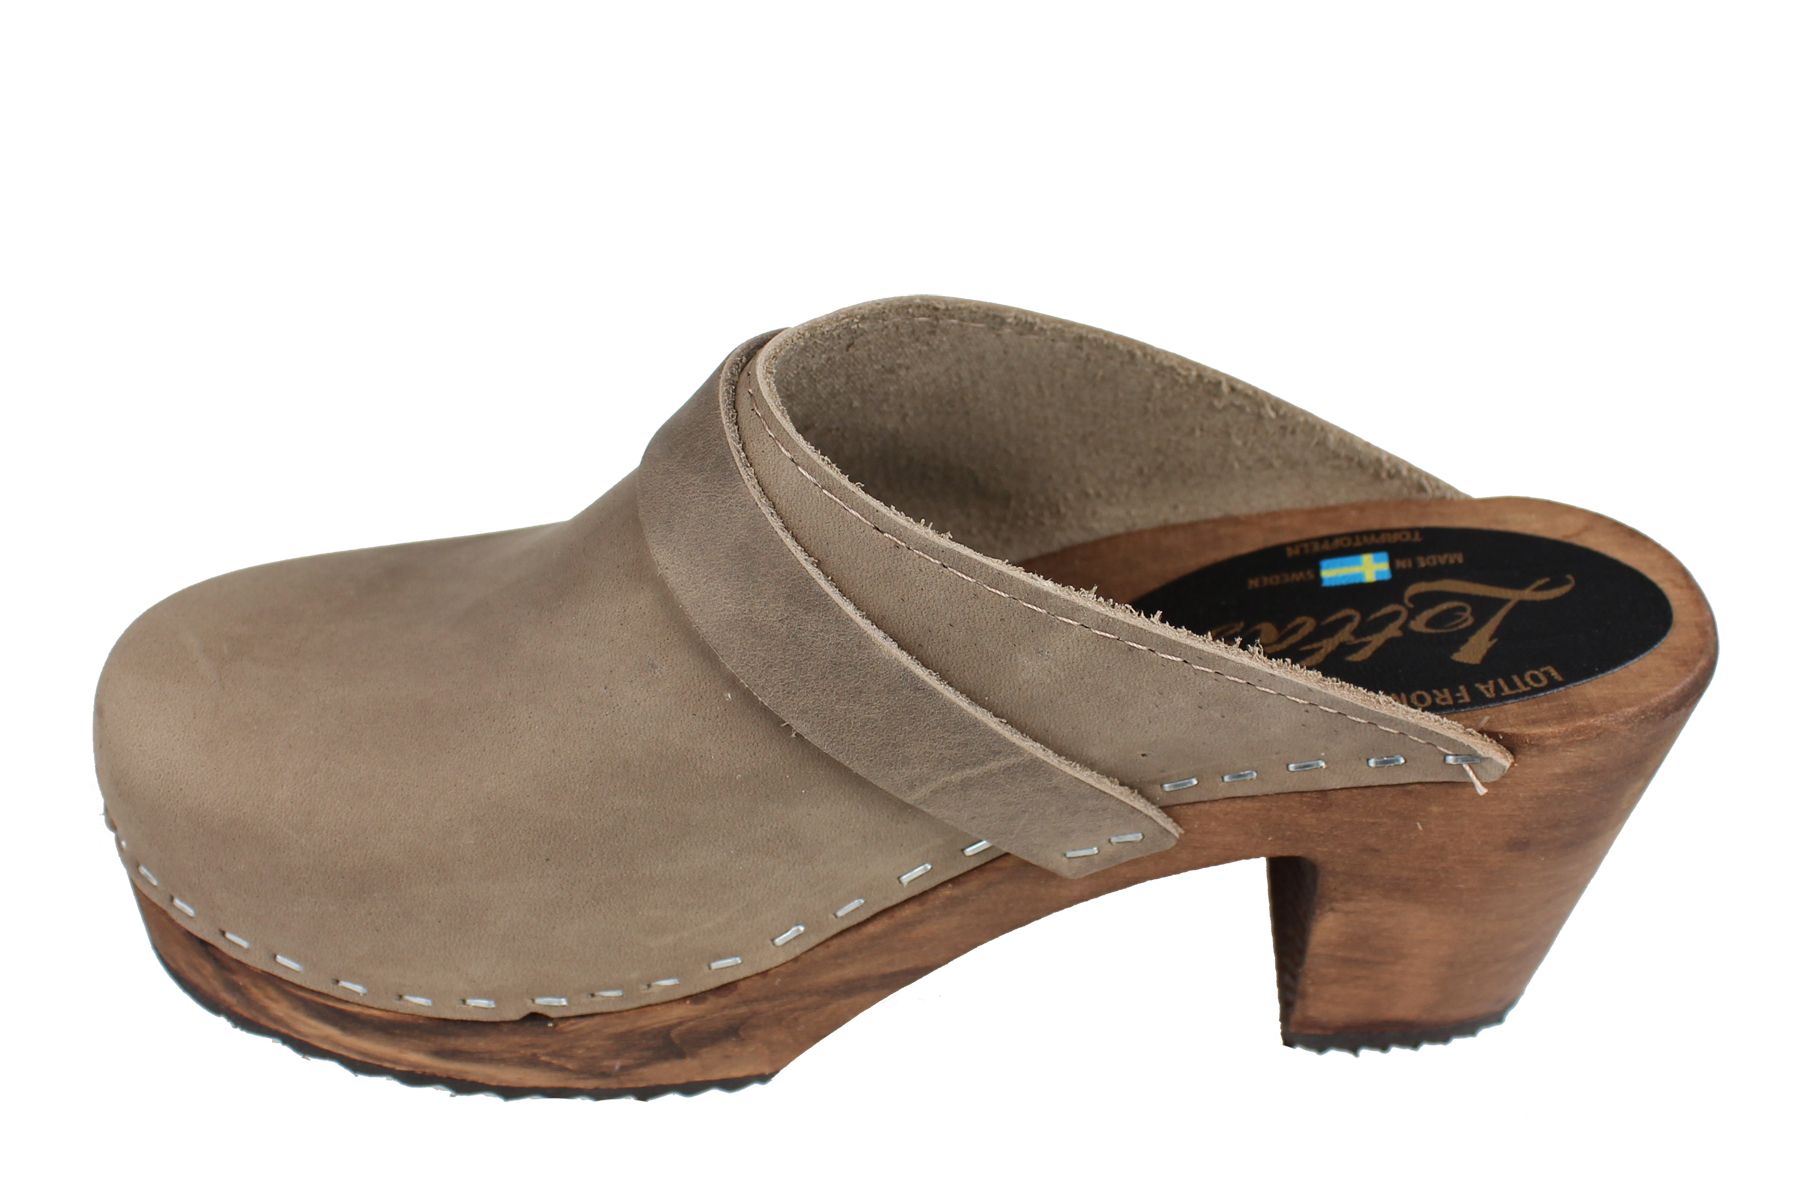  High Heel Classic Clog in Taupe Oiled Nubuck on Brown Base with Strap Seconds